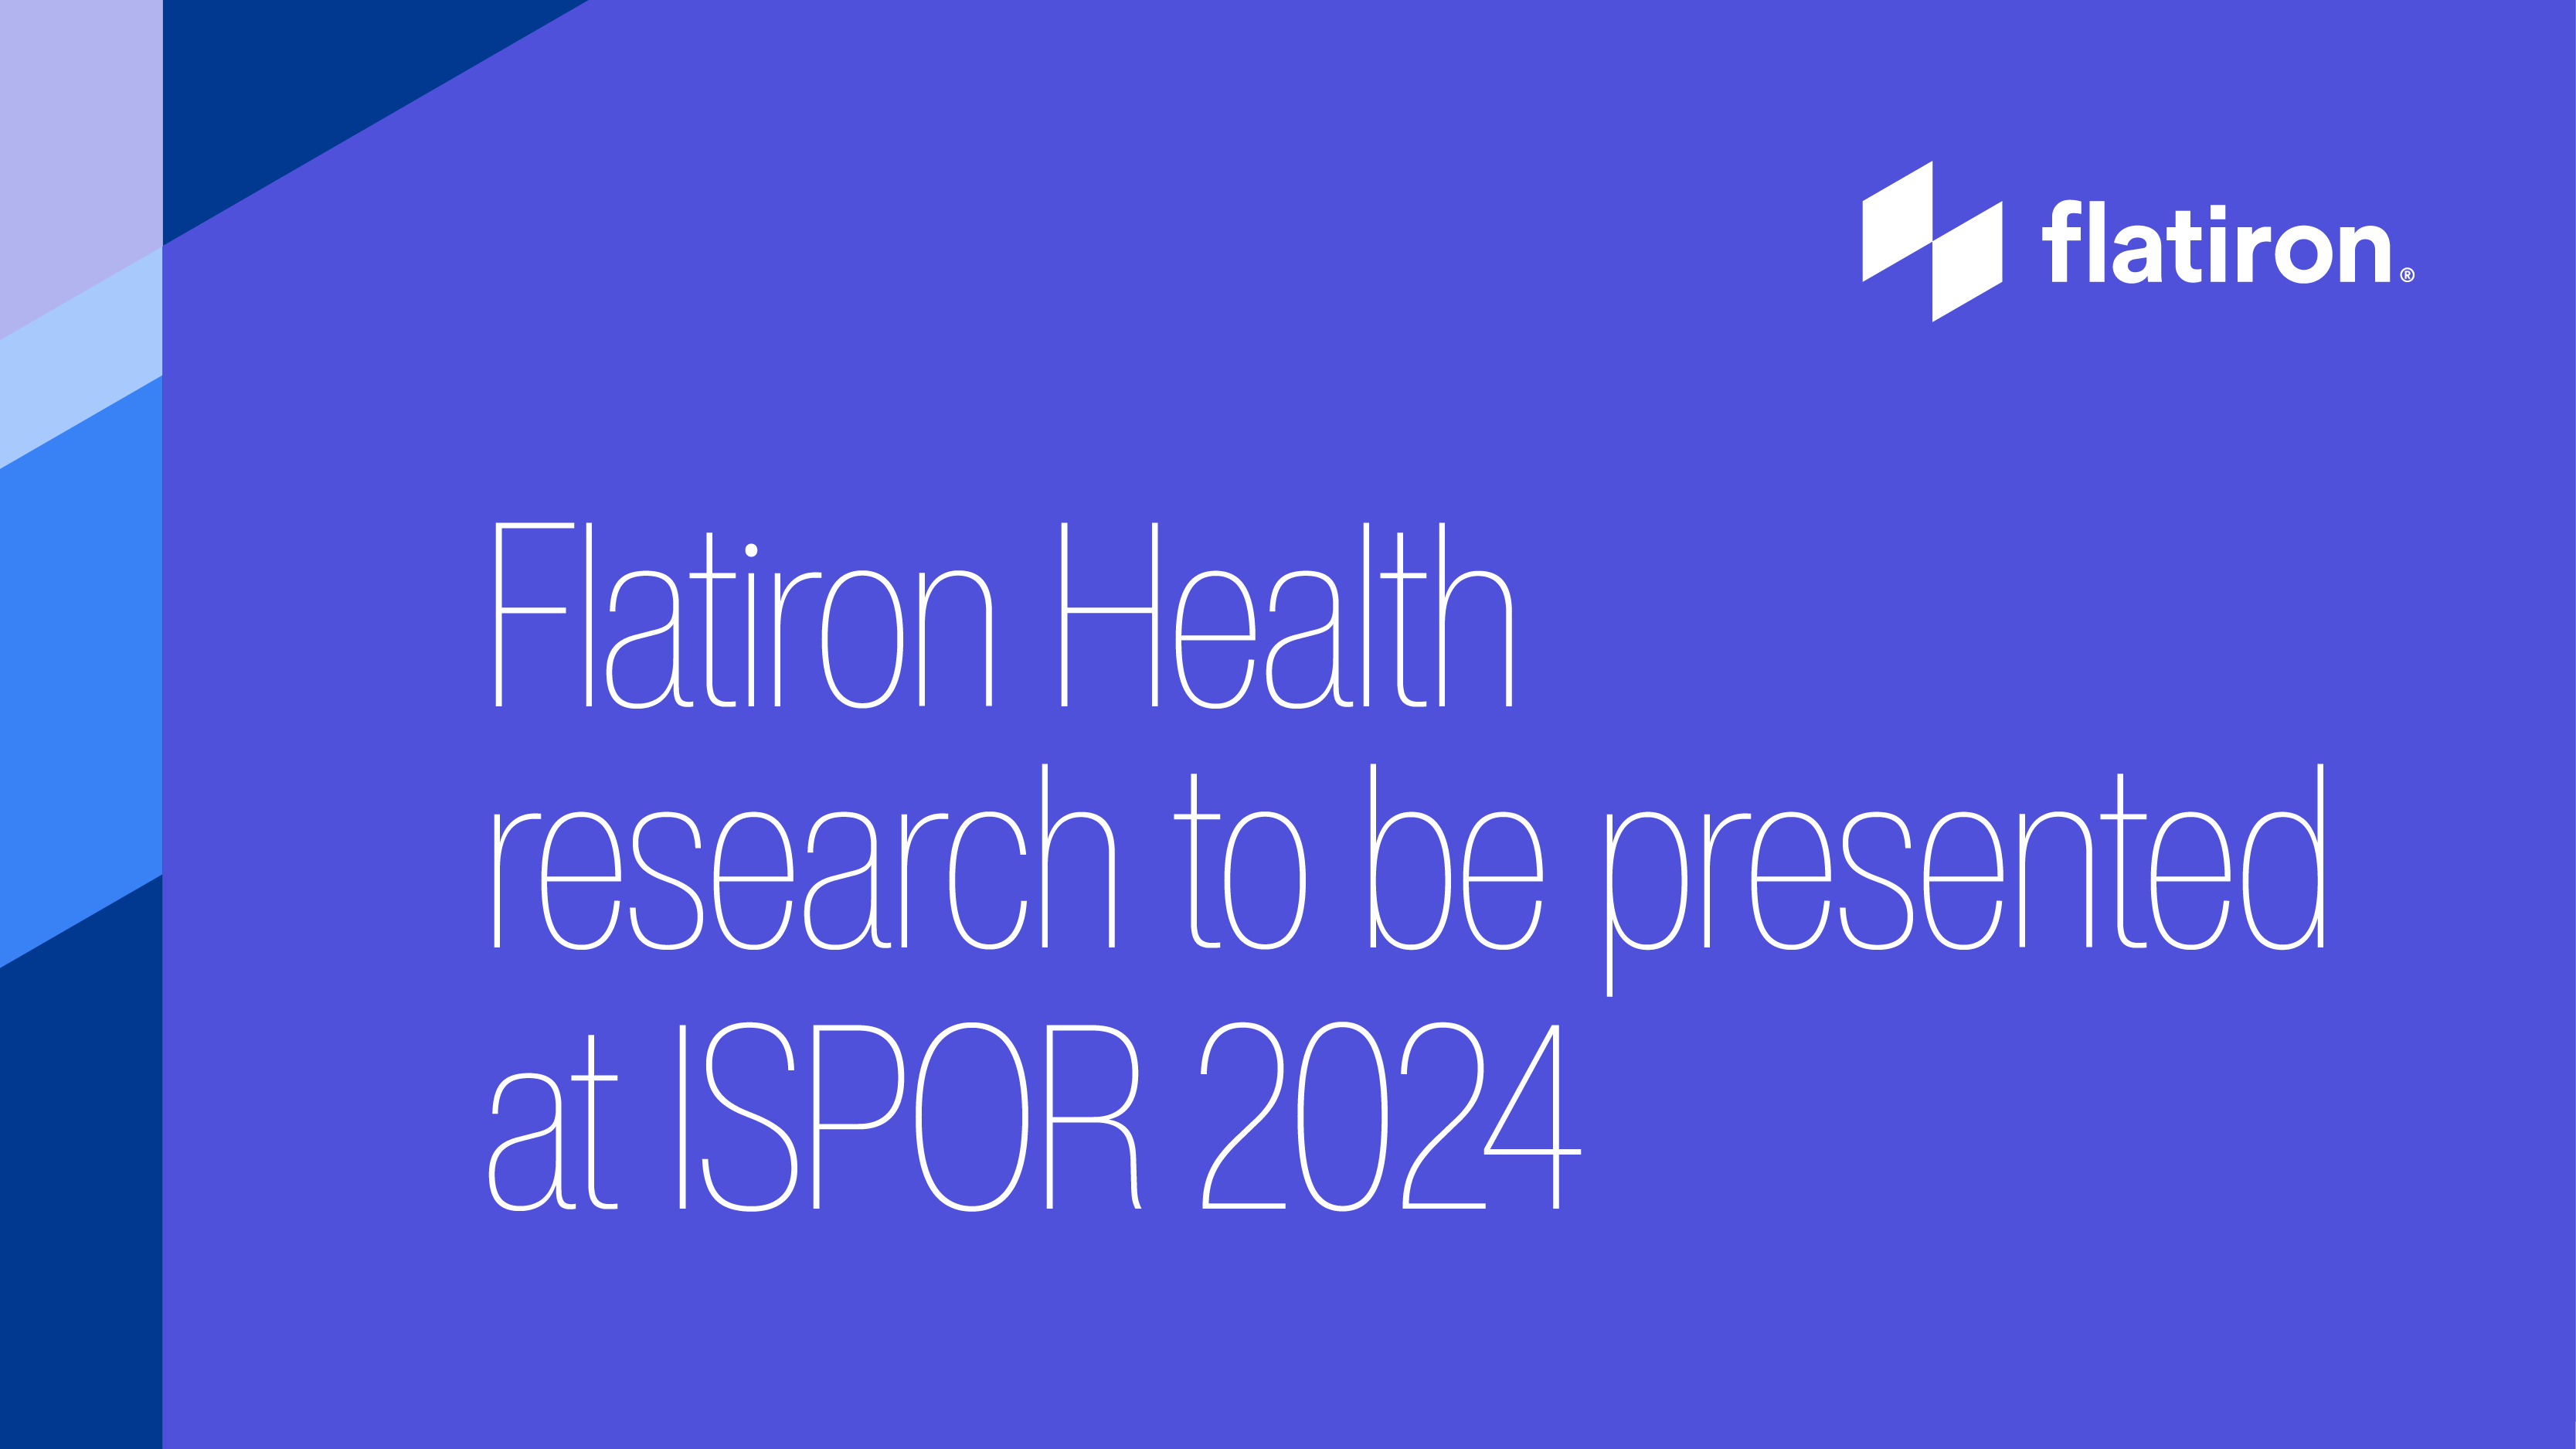 Flatiron Health announces research to be presented at ISPOR 2024